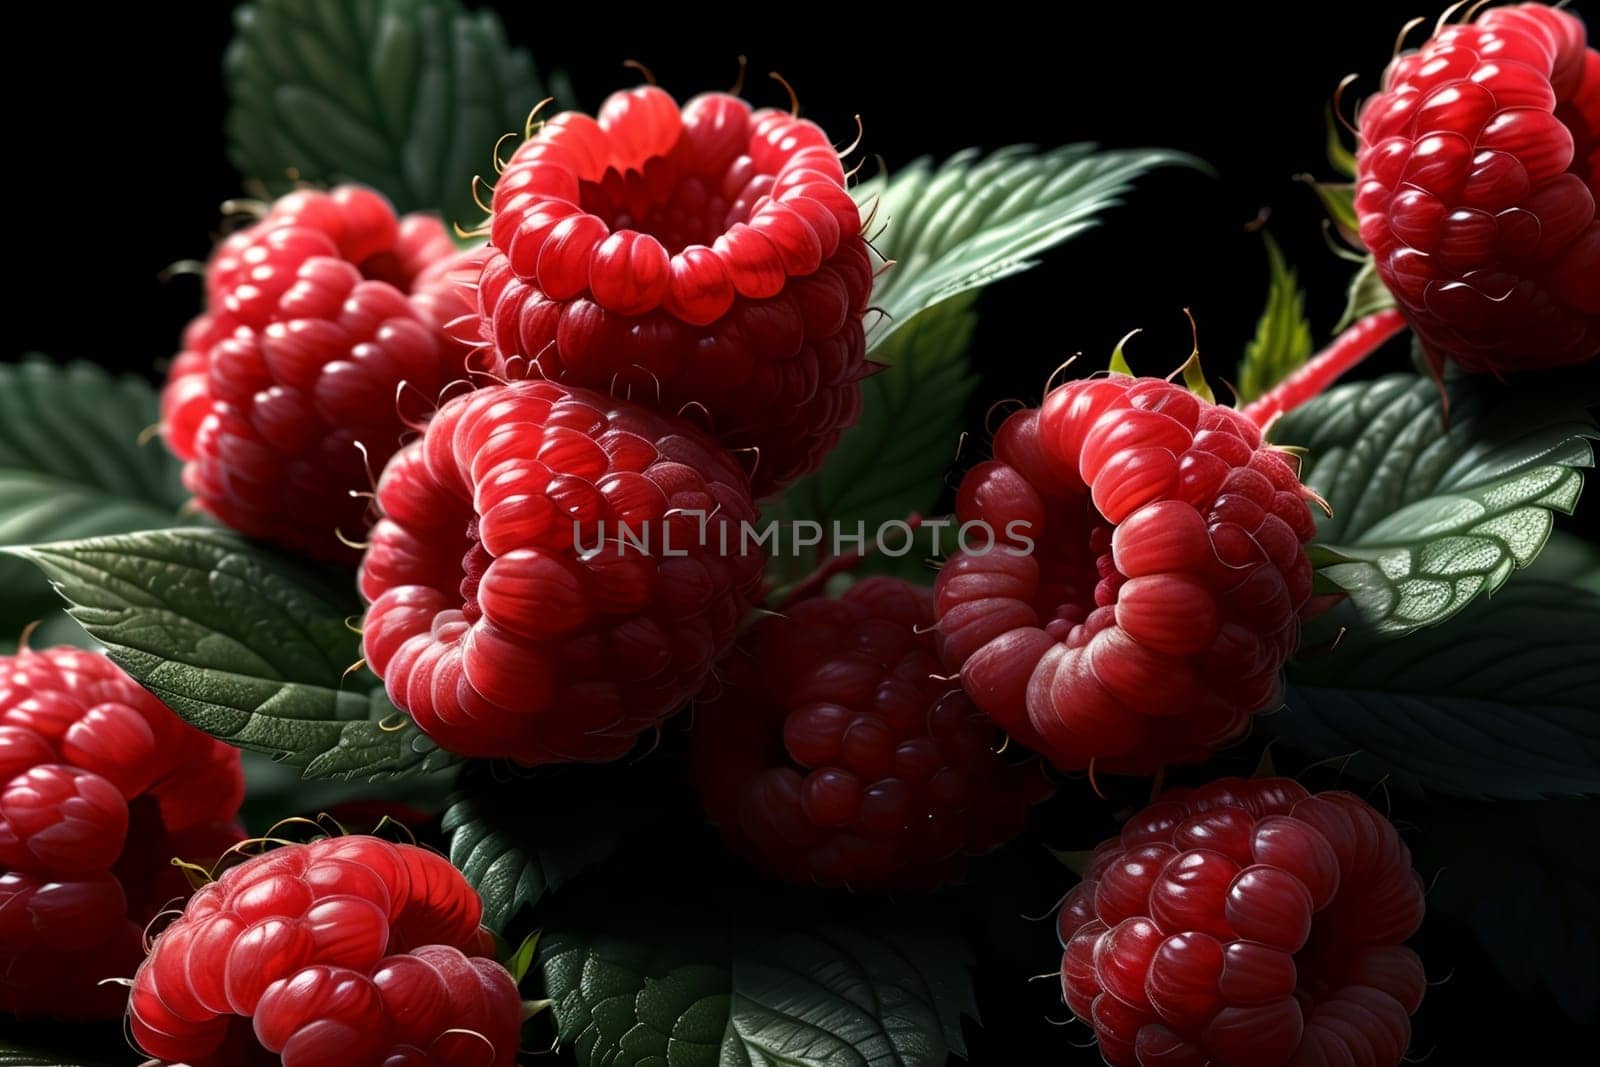 ripe raspberries with leaves isolated on a black background.